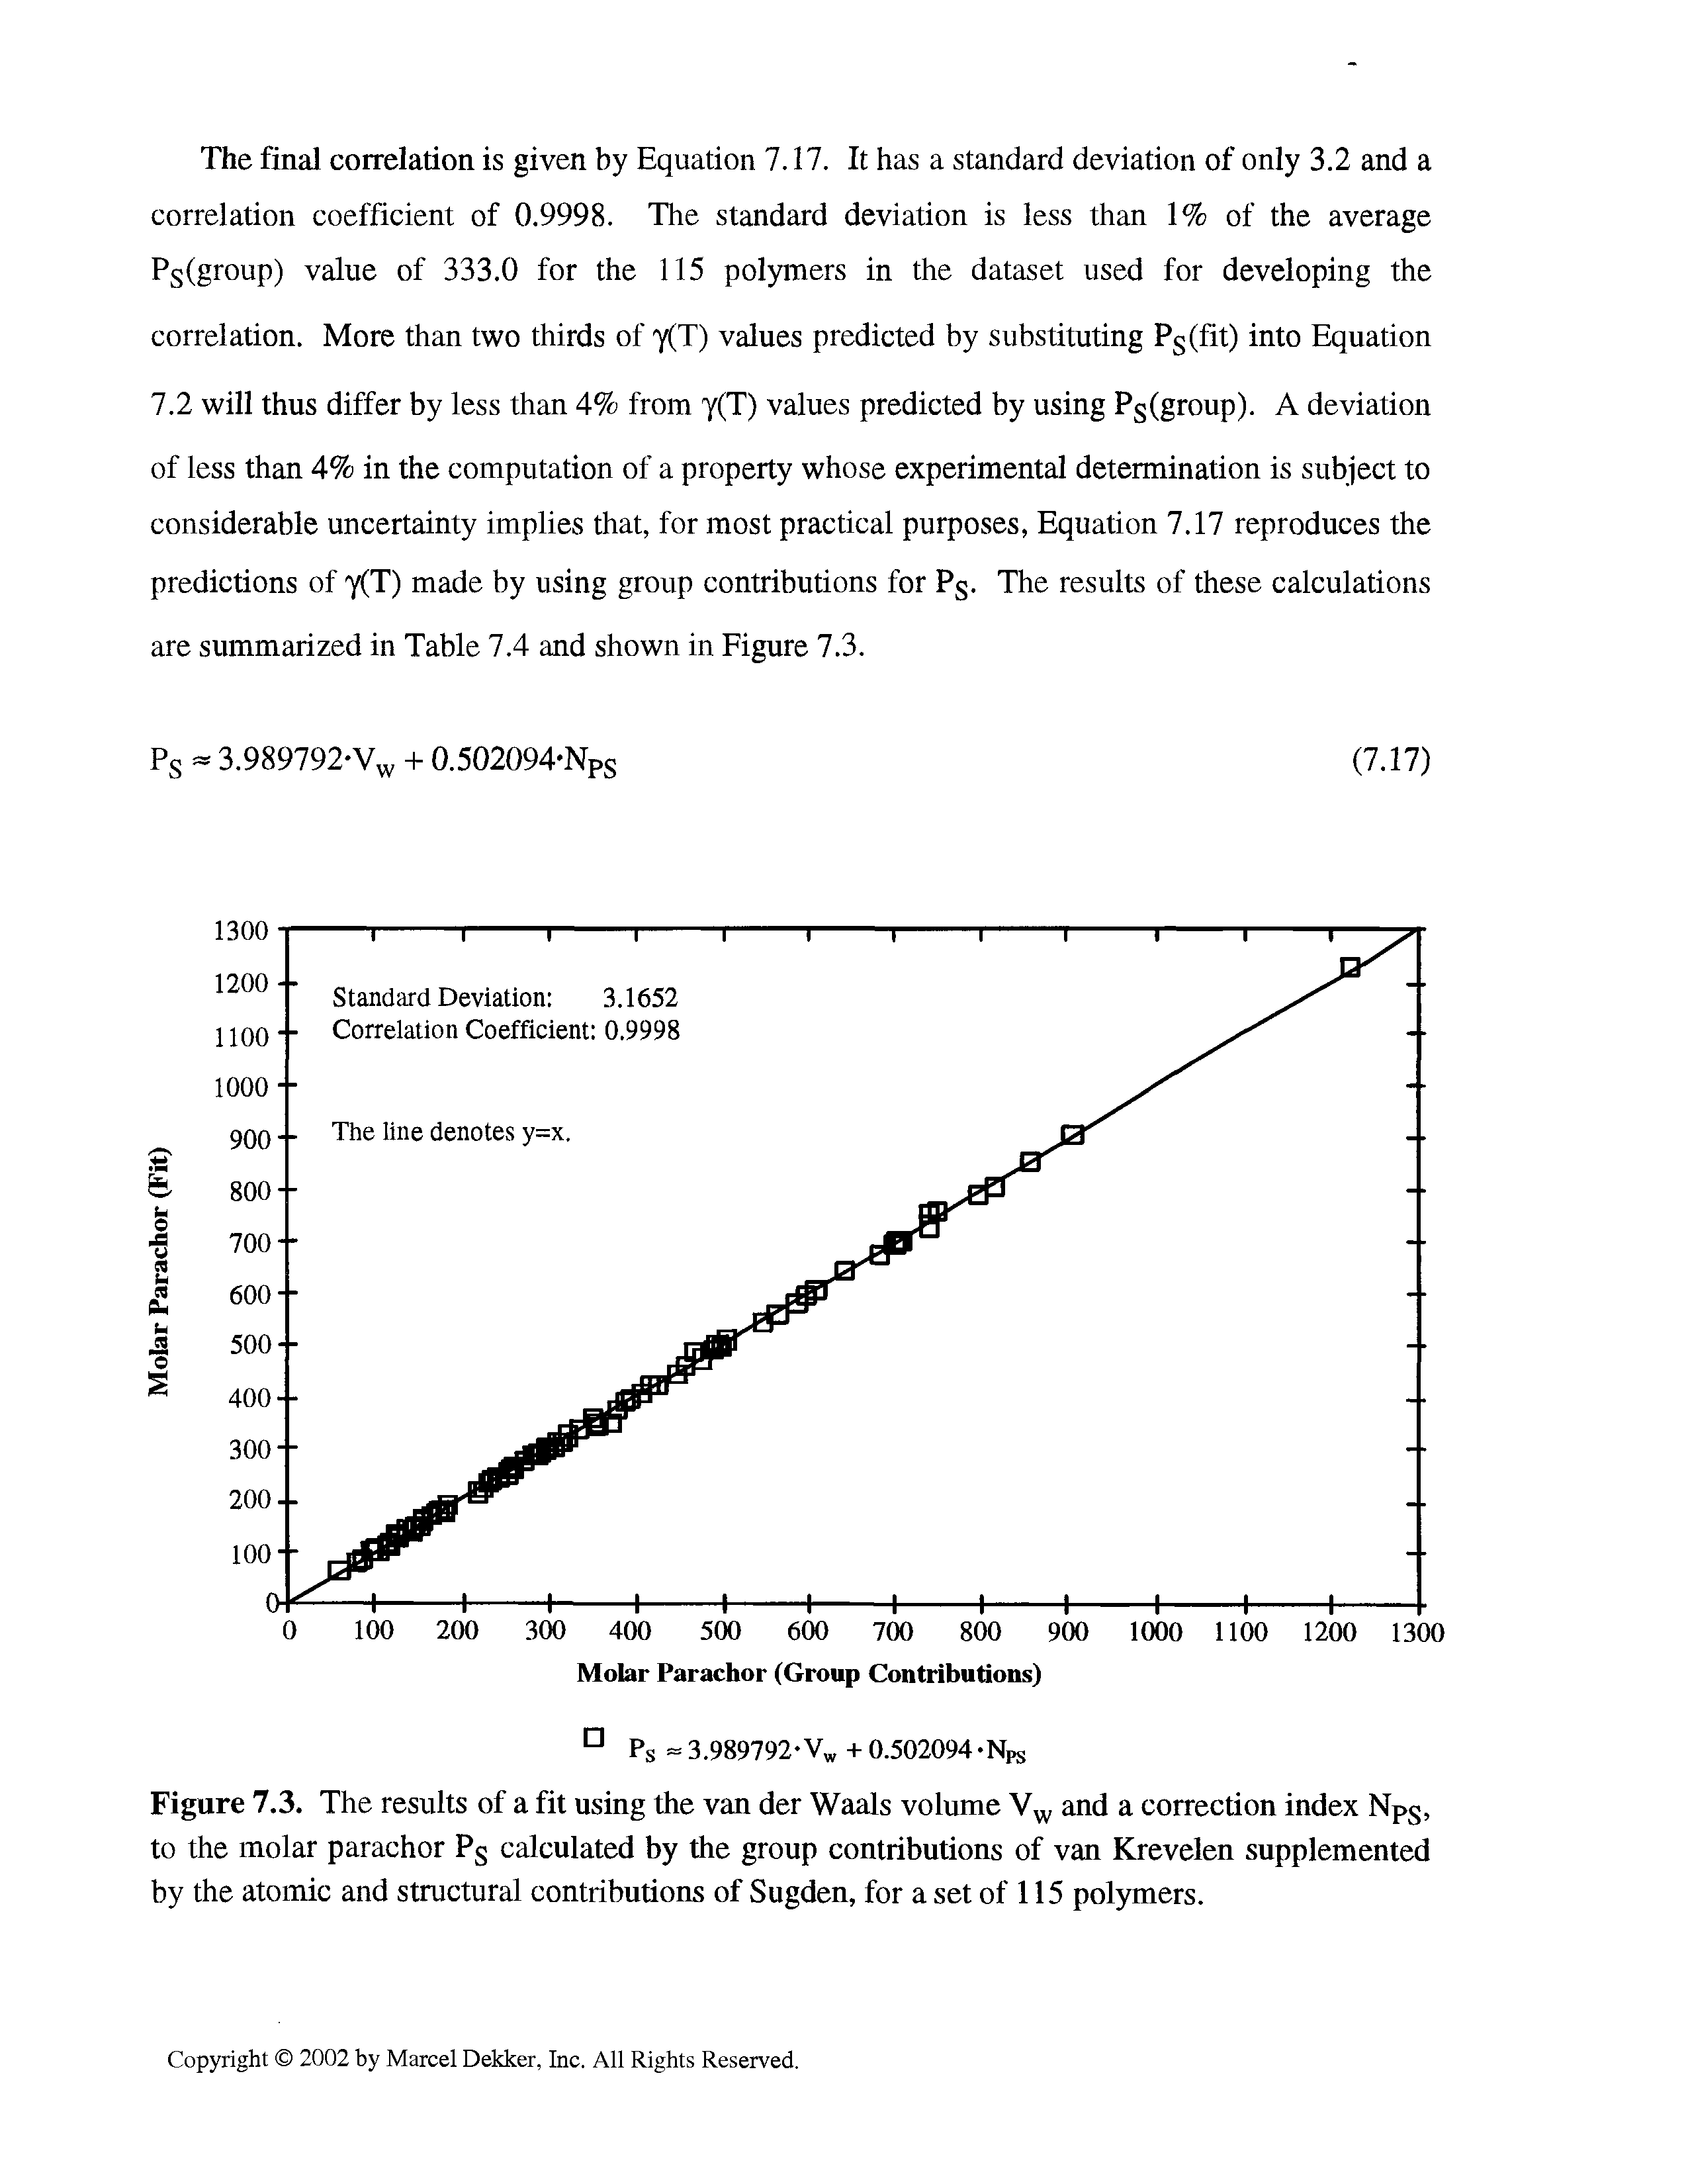 Figure 7.3. The results of a fit using the van der Waals volume Vw and a correction index NPS, to the molar parachor P calculated by the group contributions of van Krevelen supplemented by the atomic and structural contributions of Sugden, for a set of 115 polymers.